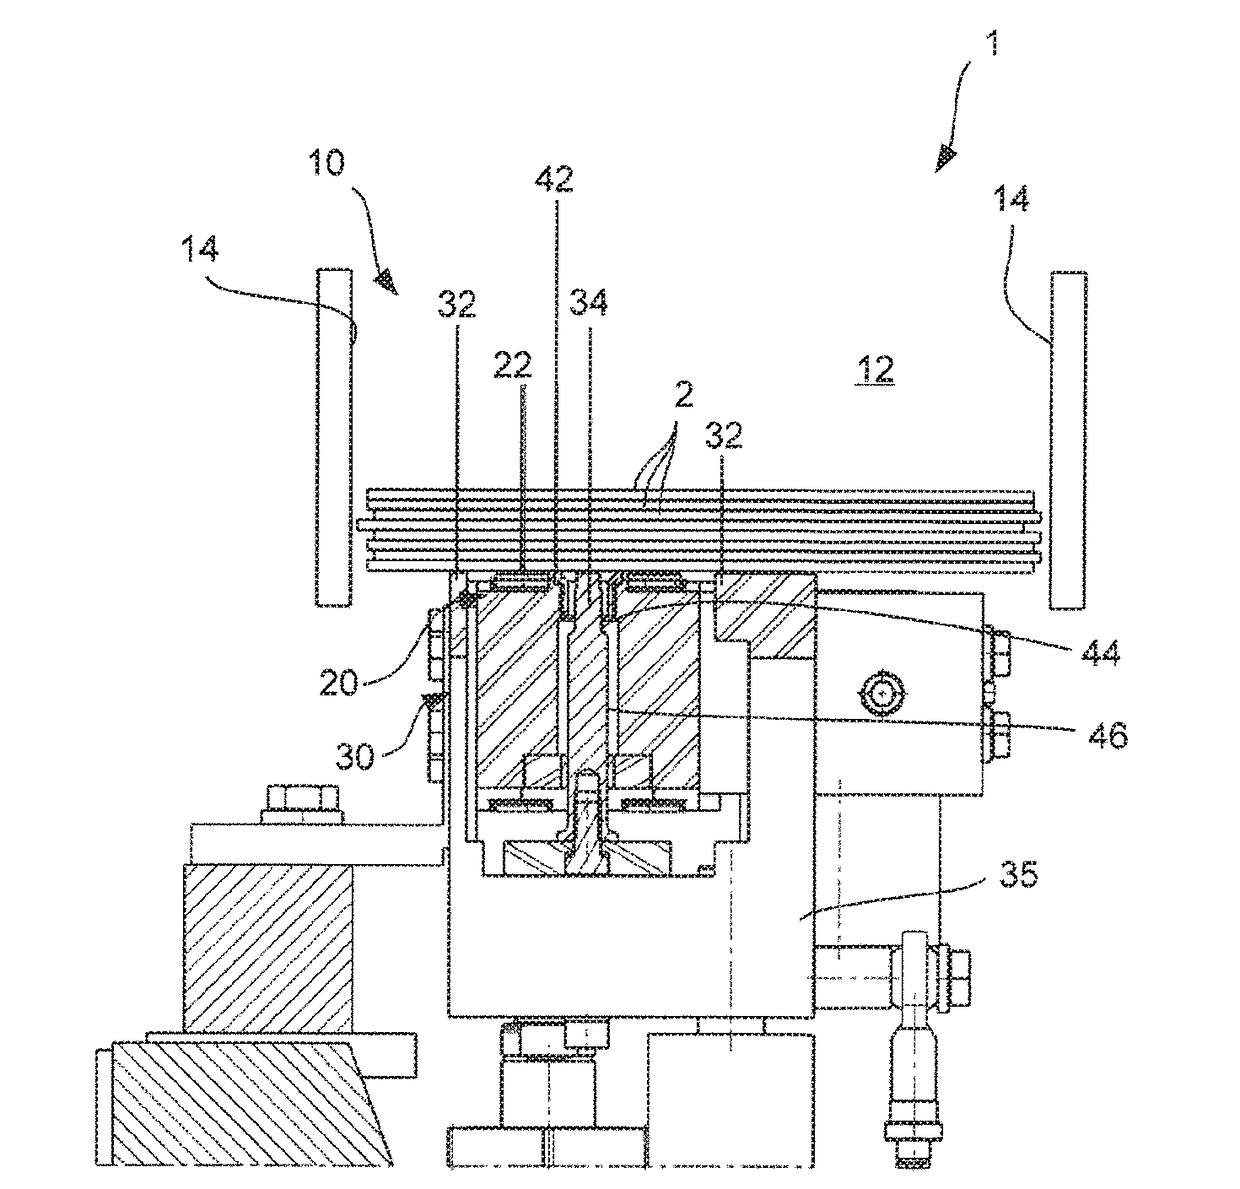 Apparatus for separating workpieces